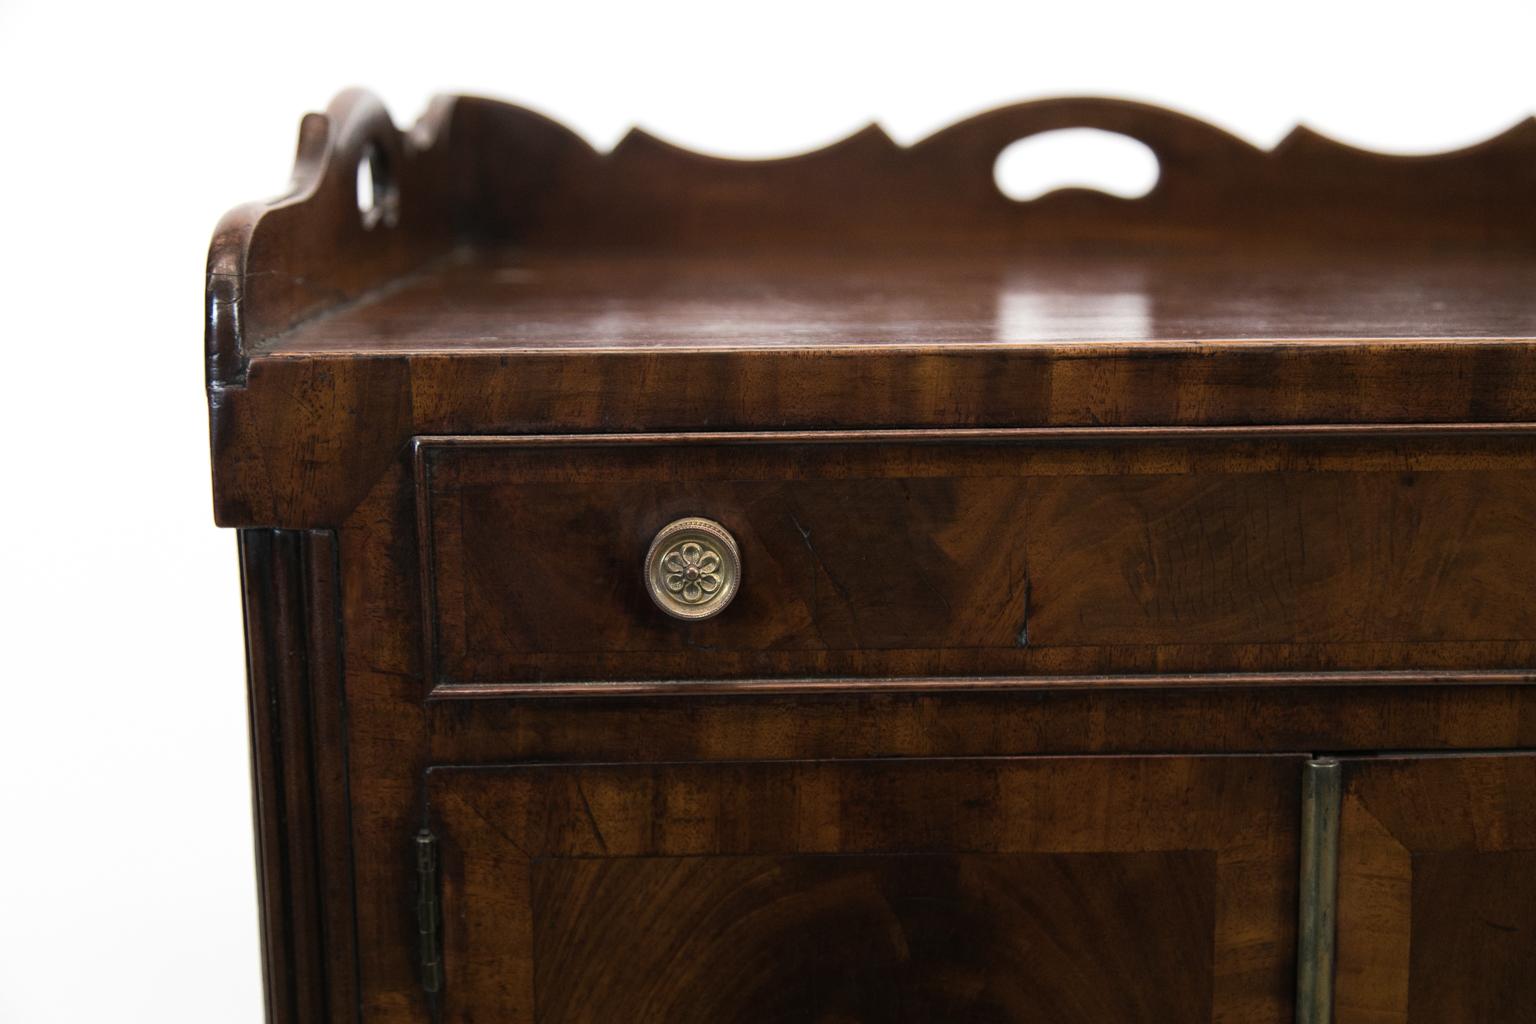 George III mahogany commode, with scalloped gallery, crotch mahogany doors, and drawers crossbanded with straight grain mahogany. It has reeded quarter columns that flank the doors and terminate in three quarter feet. The lower drawer has the